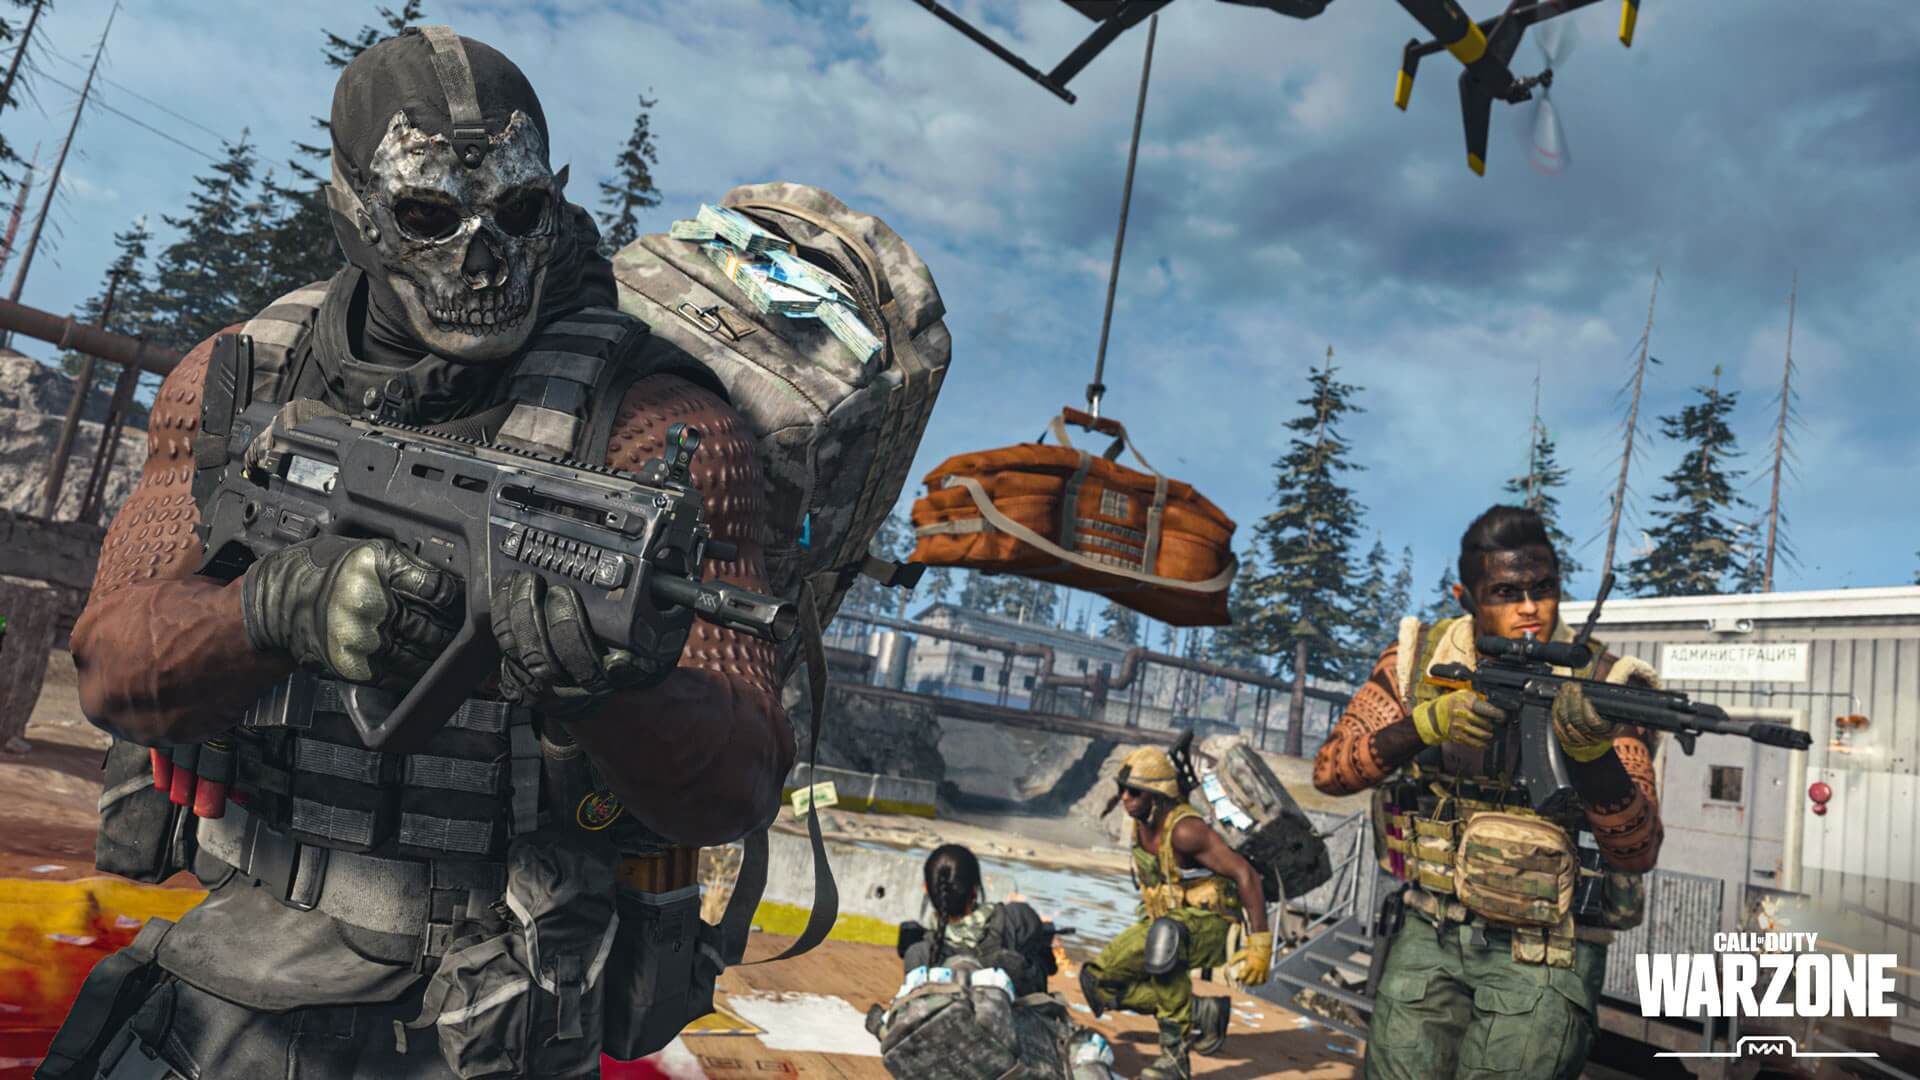 Activision's F2P battle royale entry, Call of Duty: Warzone, launches tomorrow